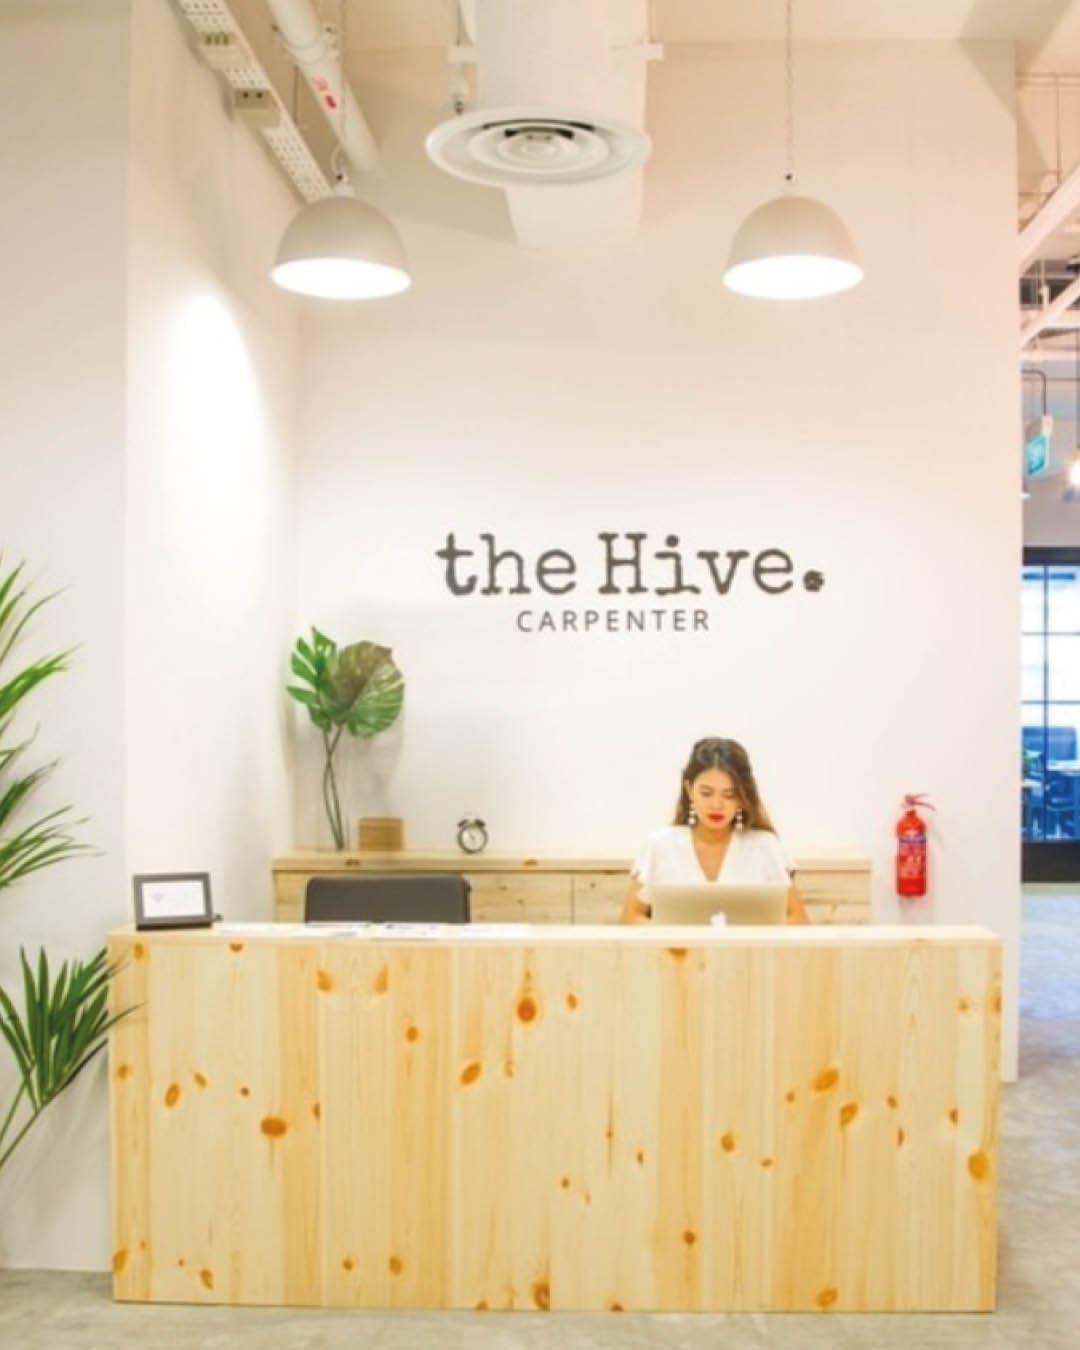 A receptionist sits behind a wooden desk at The Hive Carpenter.